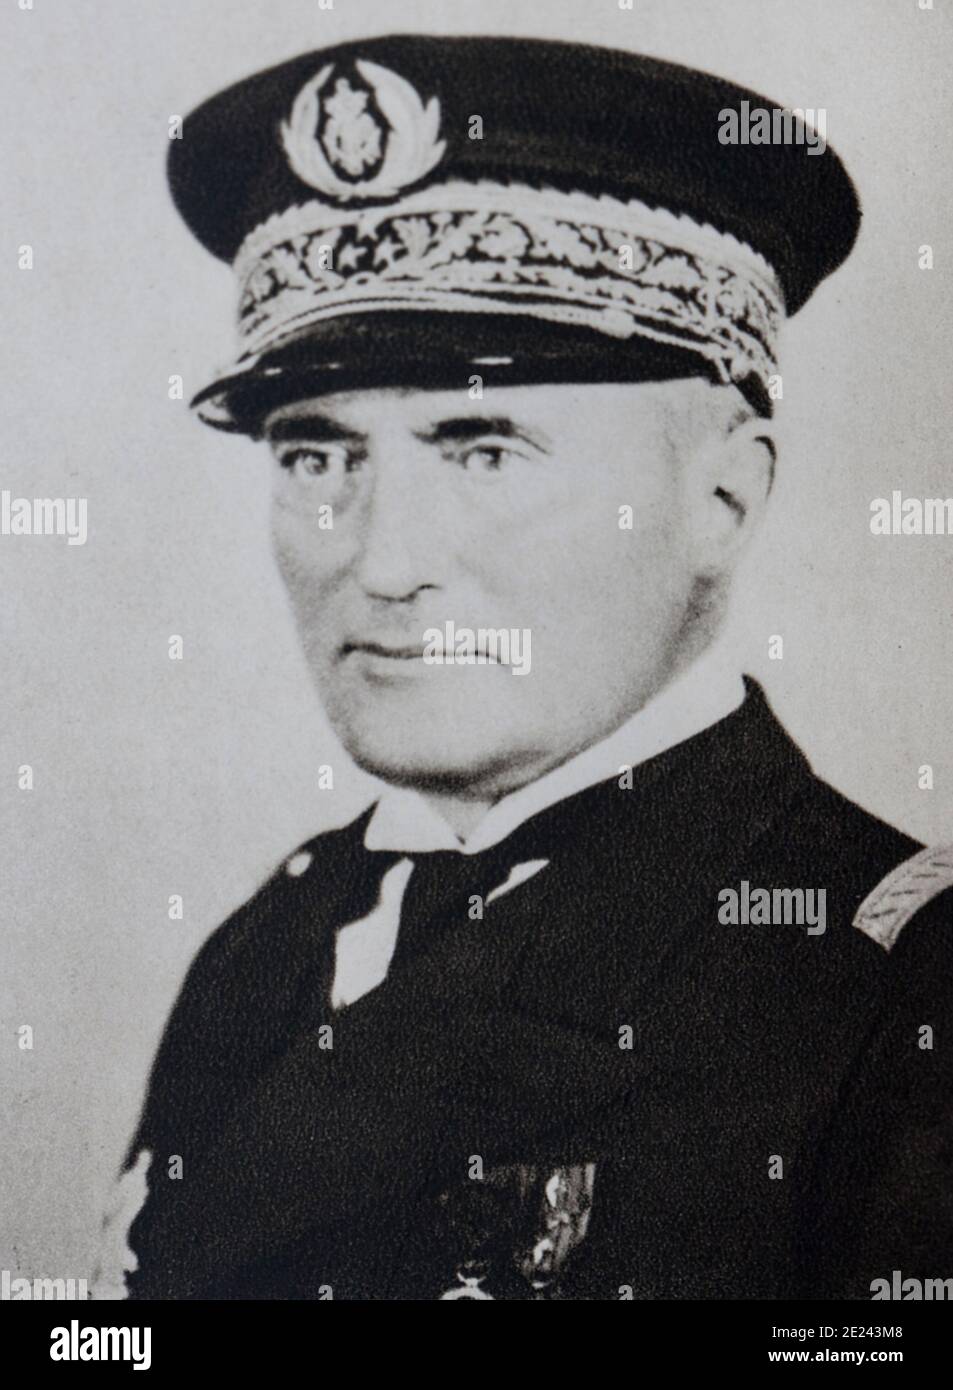 Admiral Darlan, who was seeking passage to camp allie when he was assassinated on December 24, 1942. Stock Photo